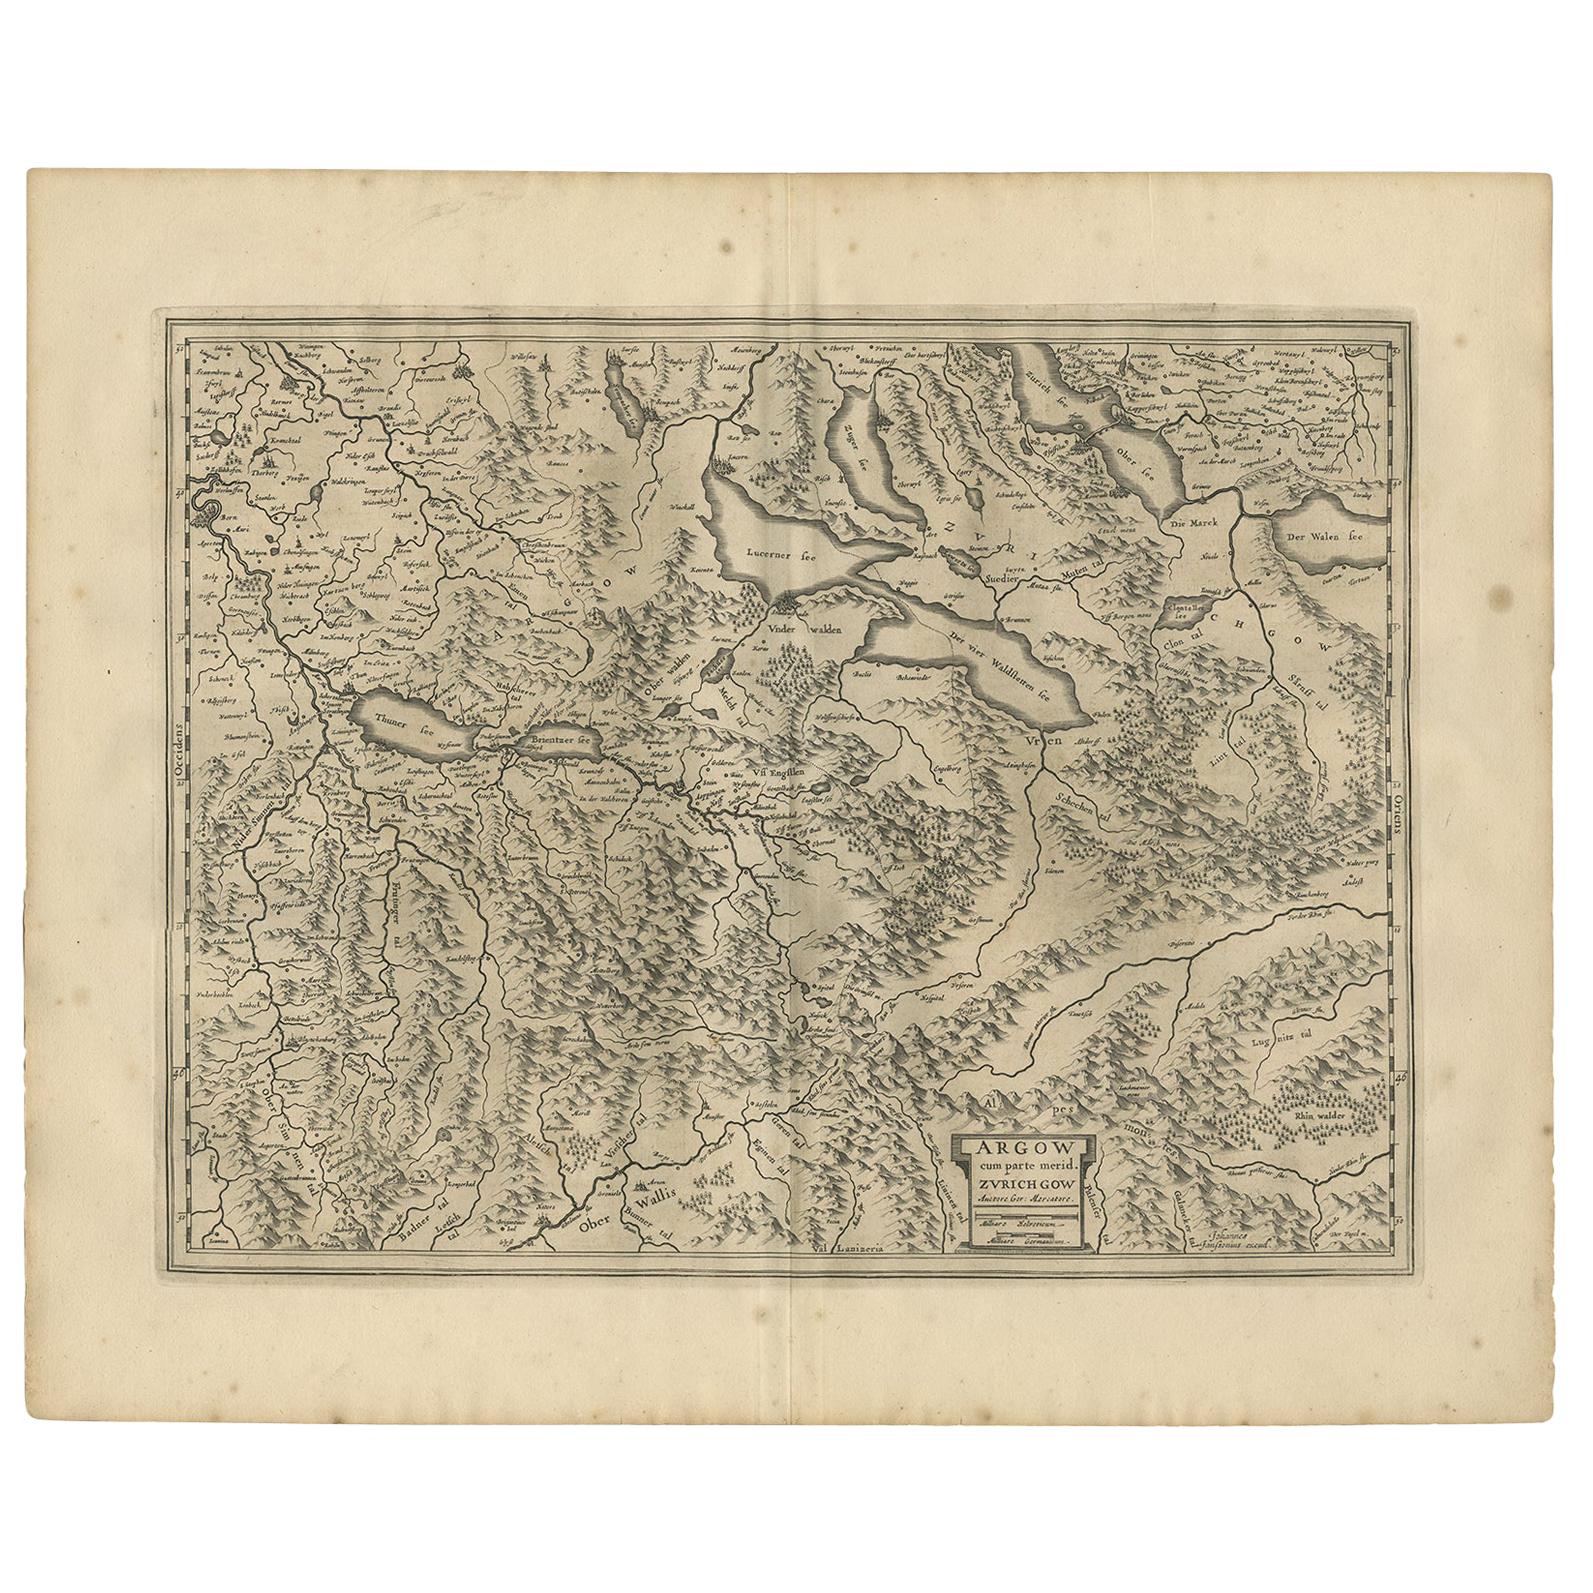 Antique Map of the Region of Aargau by Janssonius, '1657' For Sale